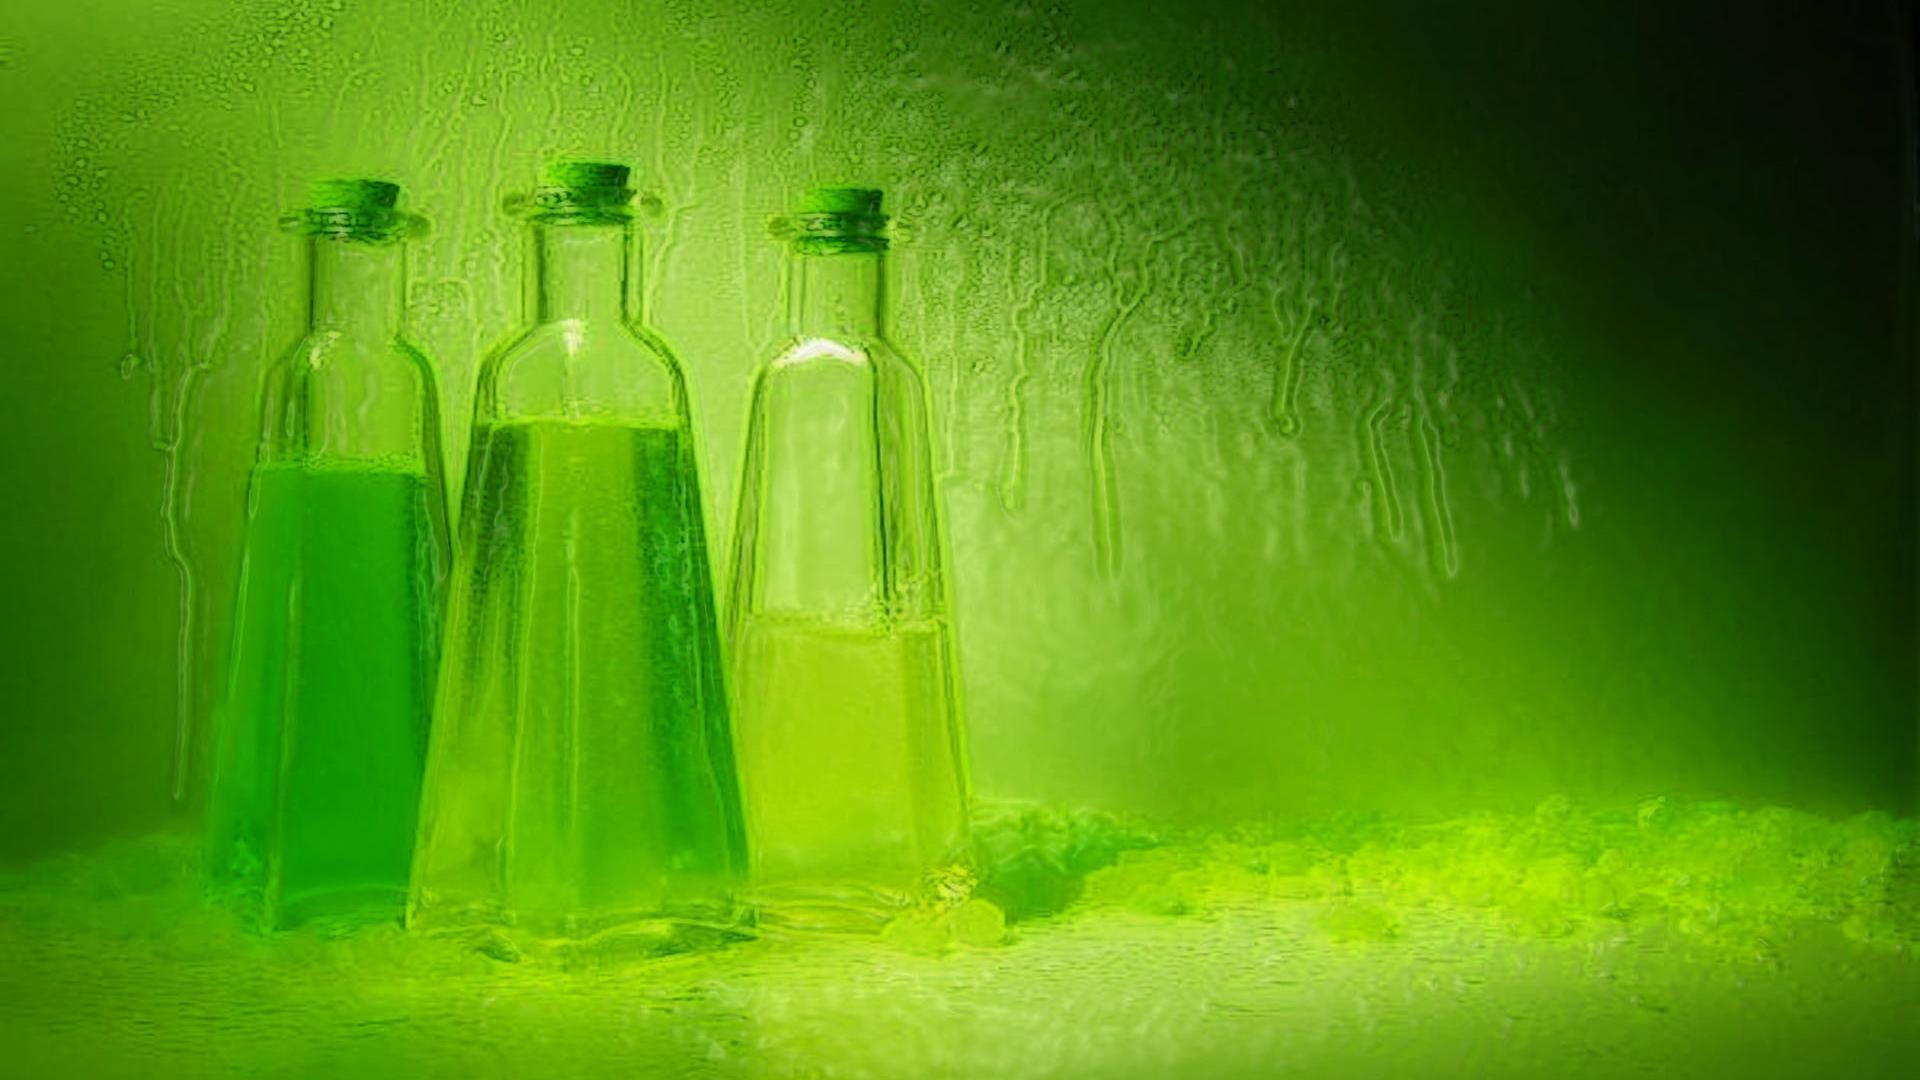 1920x1080  hd Green and relaxed bottle design desktop pictures wide  wallpapers:1280x800,1440x900,